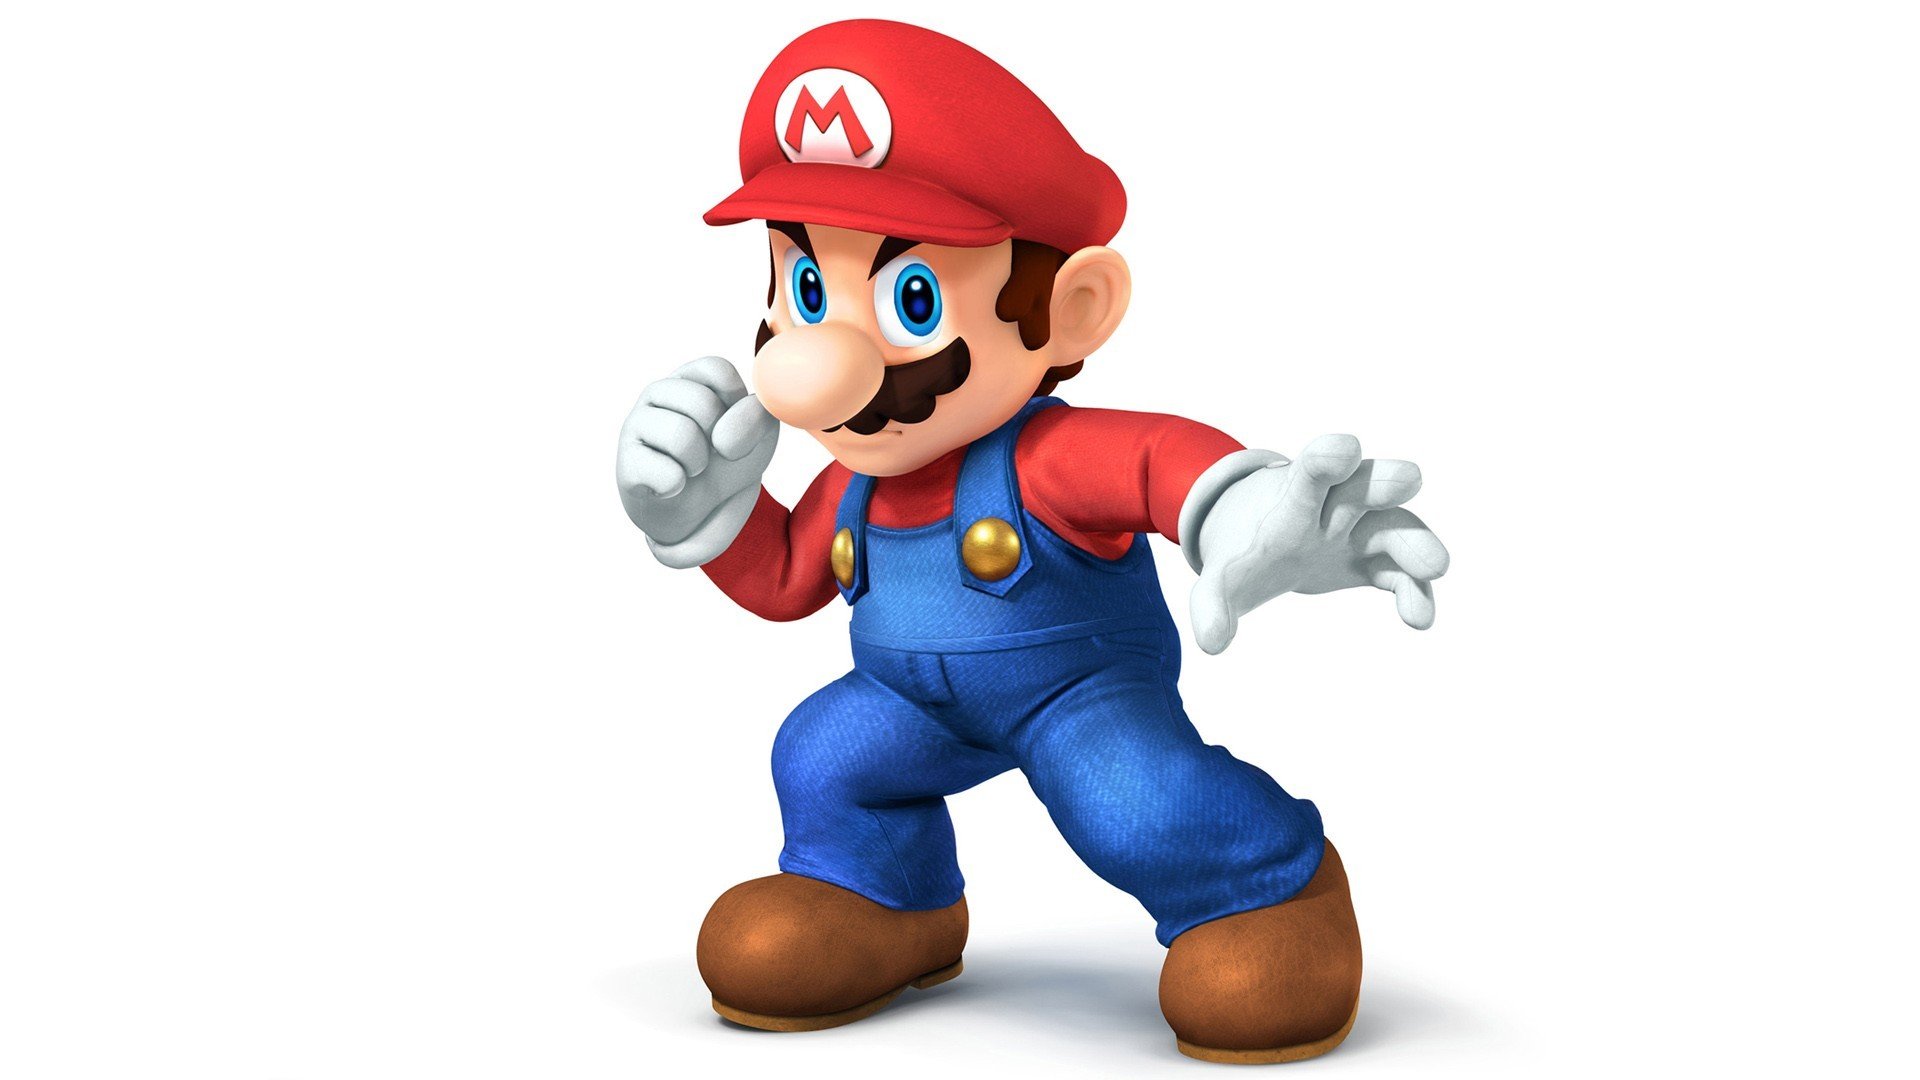 Awesome Super Mario Bros. free wallpaper ID:357630 for hd 1920x1080 desktop